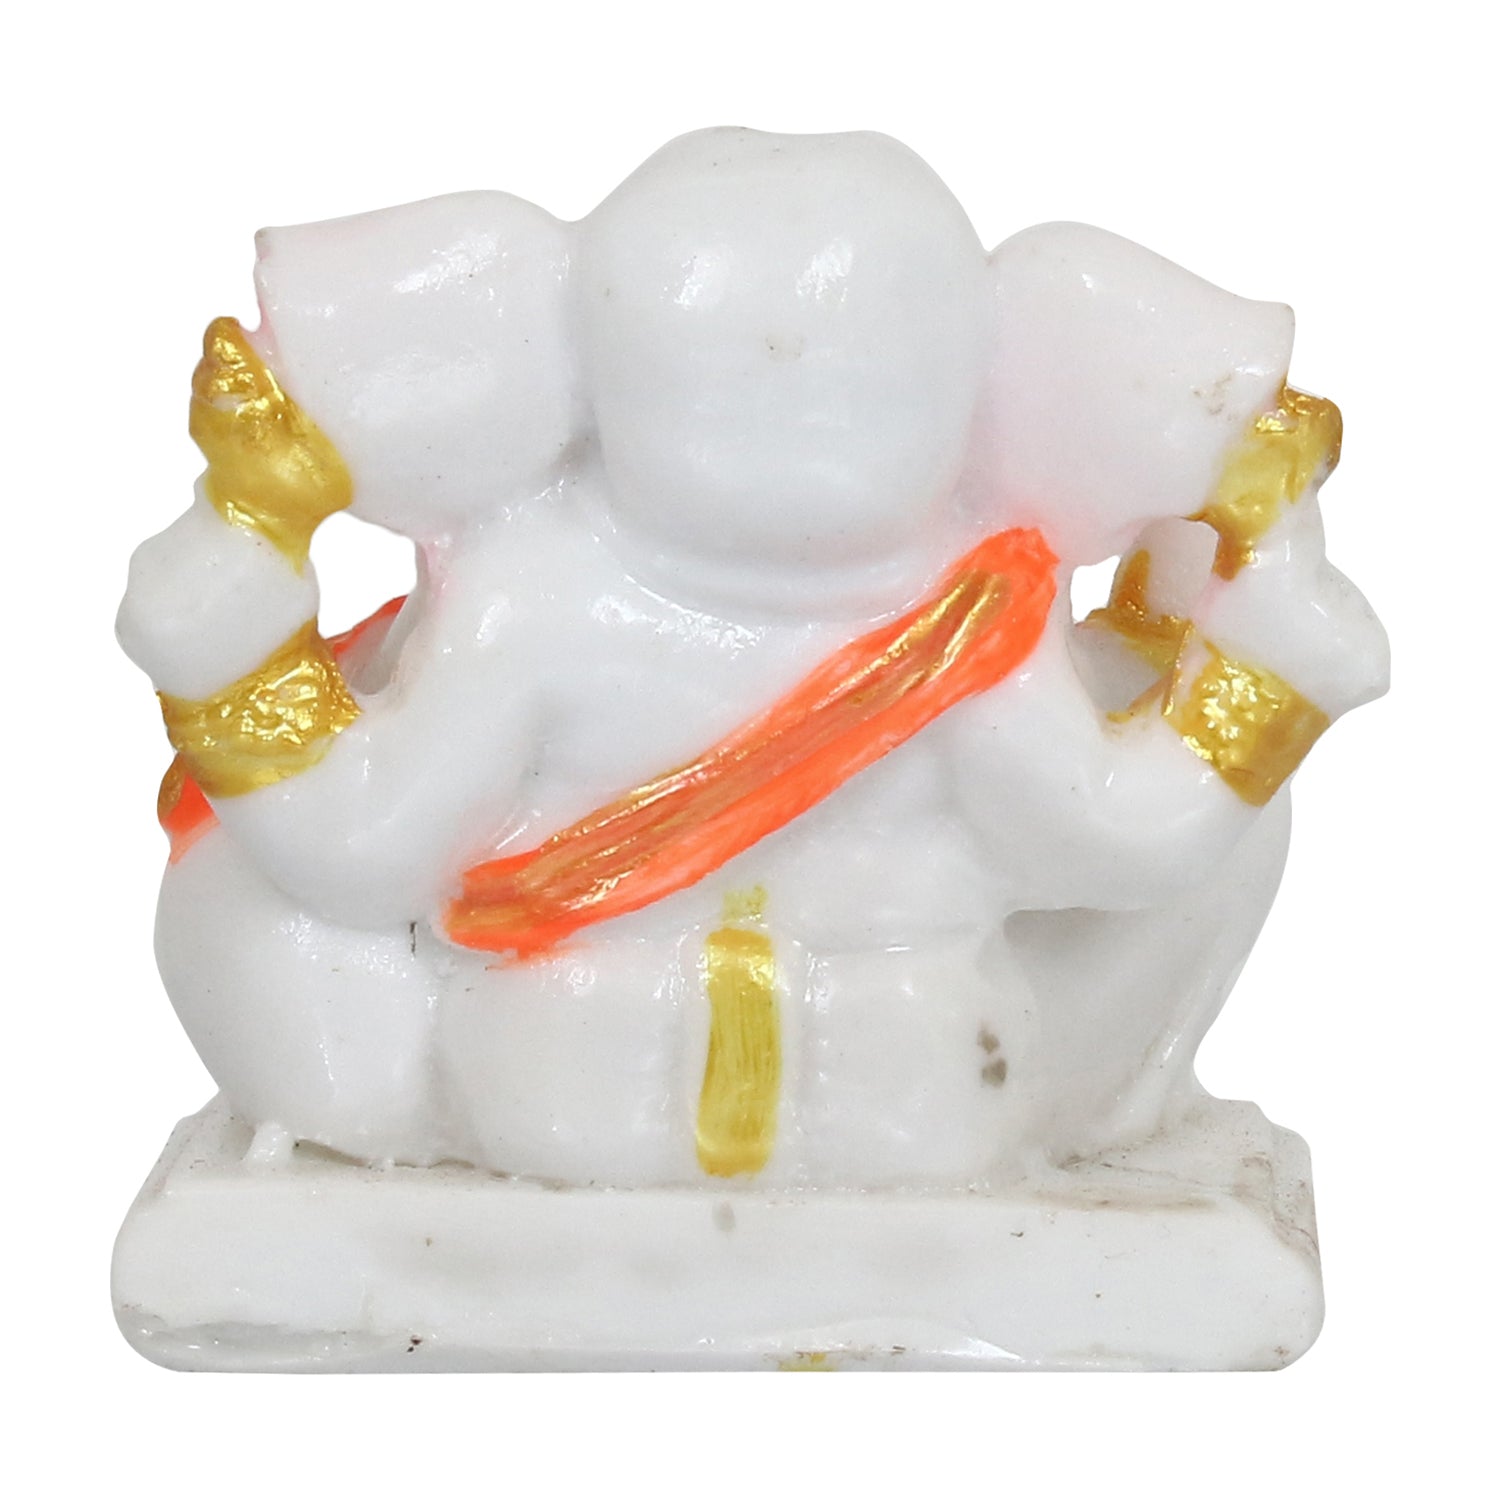 Decorative Lord Ganesha Idol for Car Dashboard, Home Temple and Office Desks 6